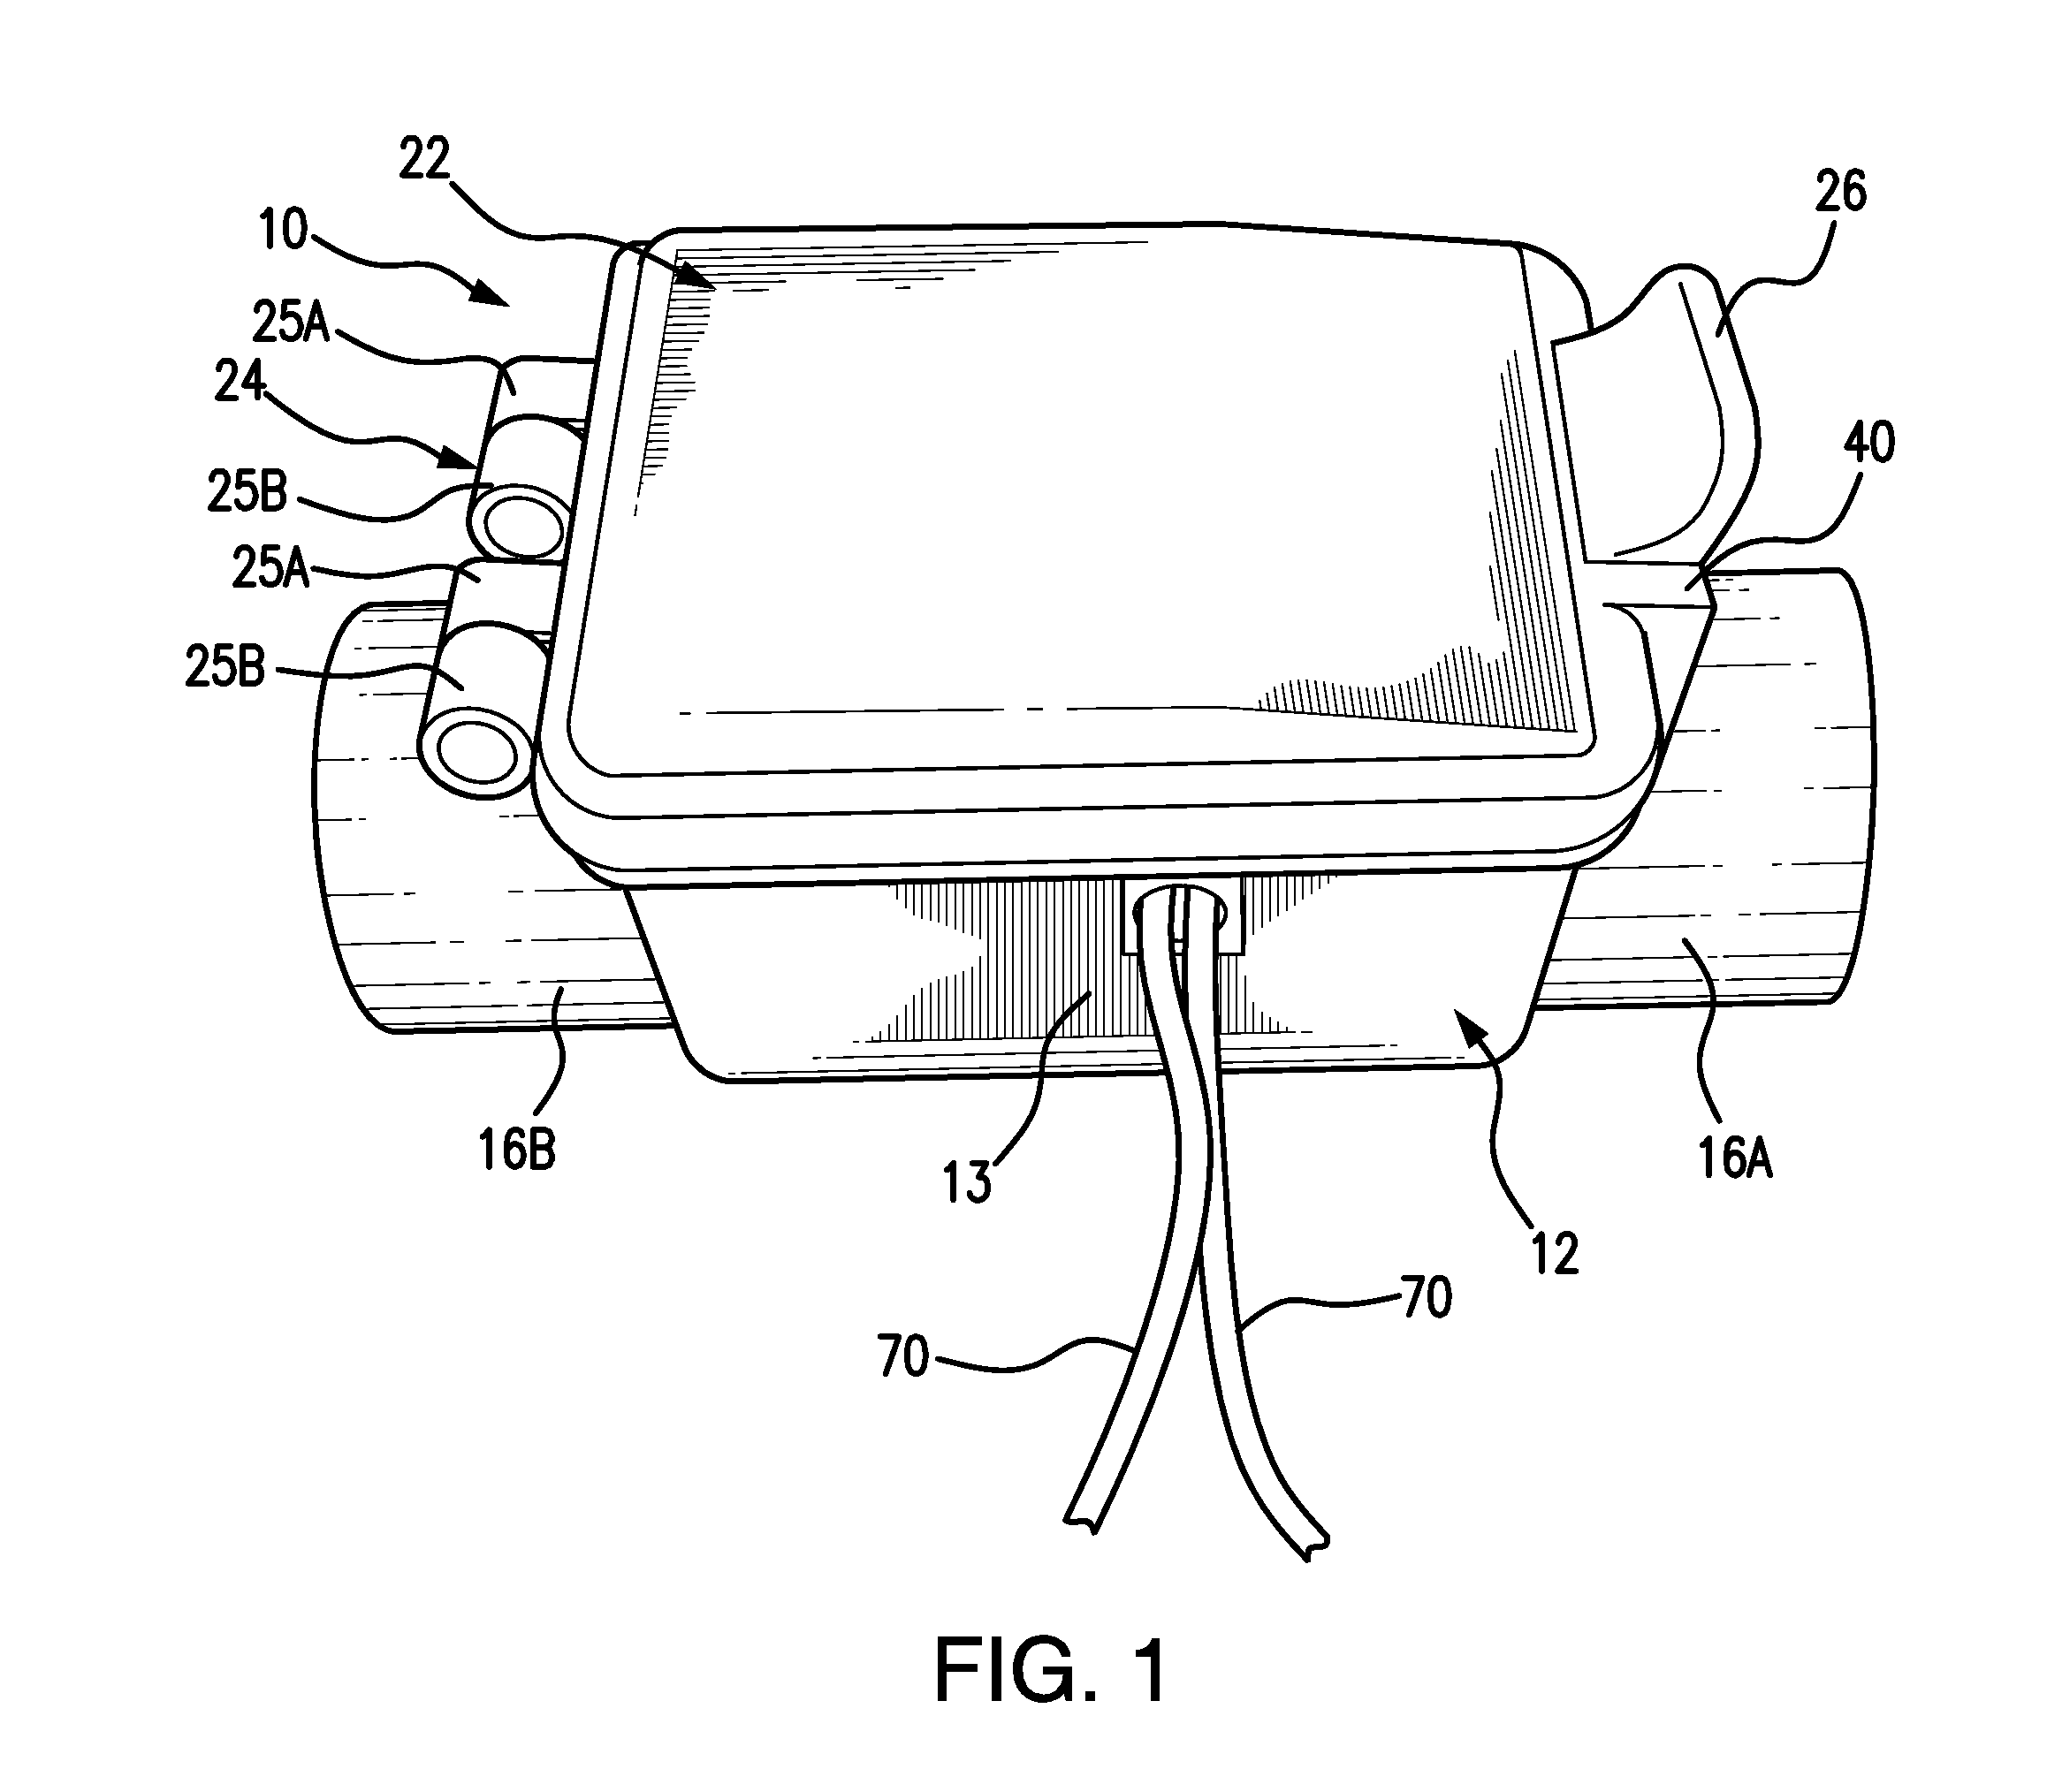 Drain line access device with interior overflow safety switch